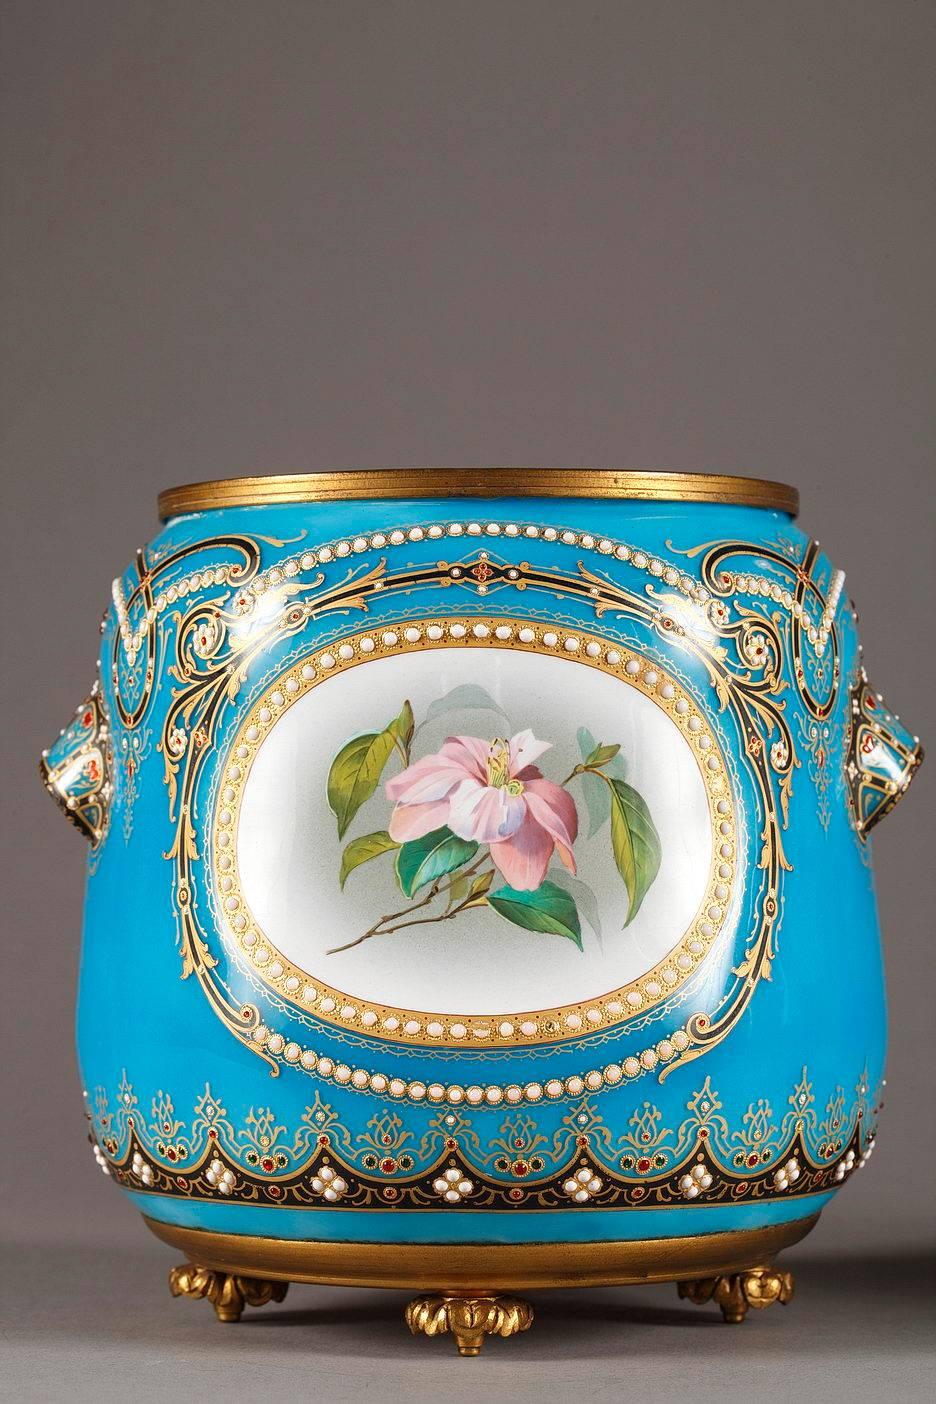 Late 19th century pair of jardinières in blue enamel from Bresse. Multicolored medallions depicting delicate flowers are framed by white and red enamel beads and gilded arabesques. Each pot has two small handles that are richly decorated with